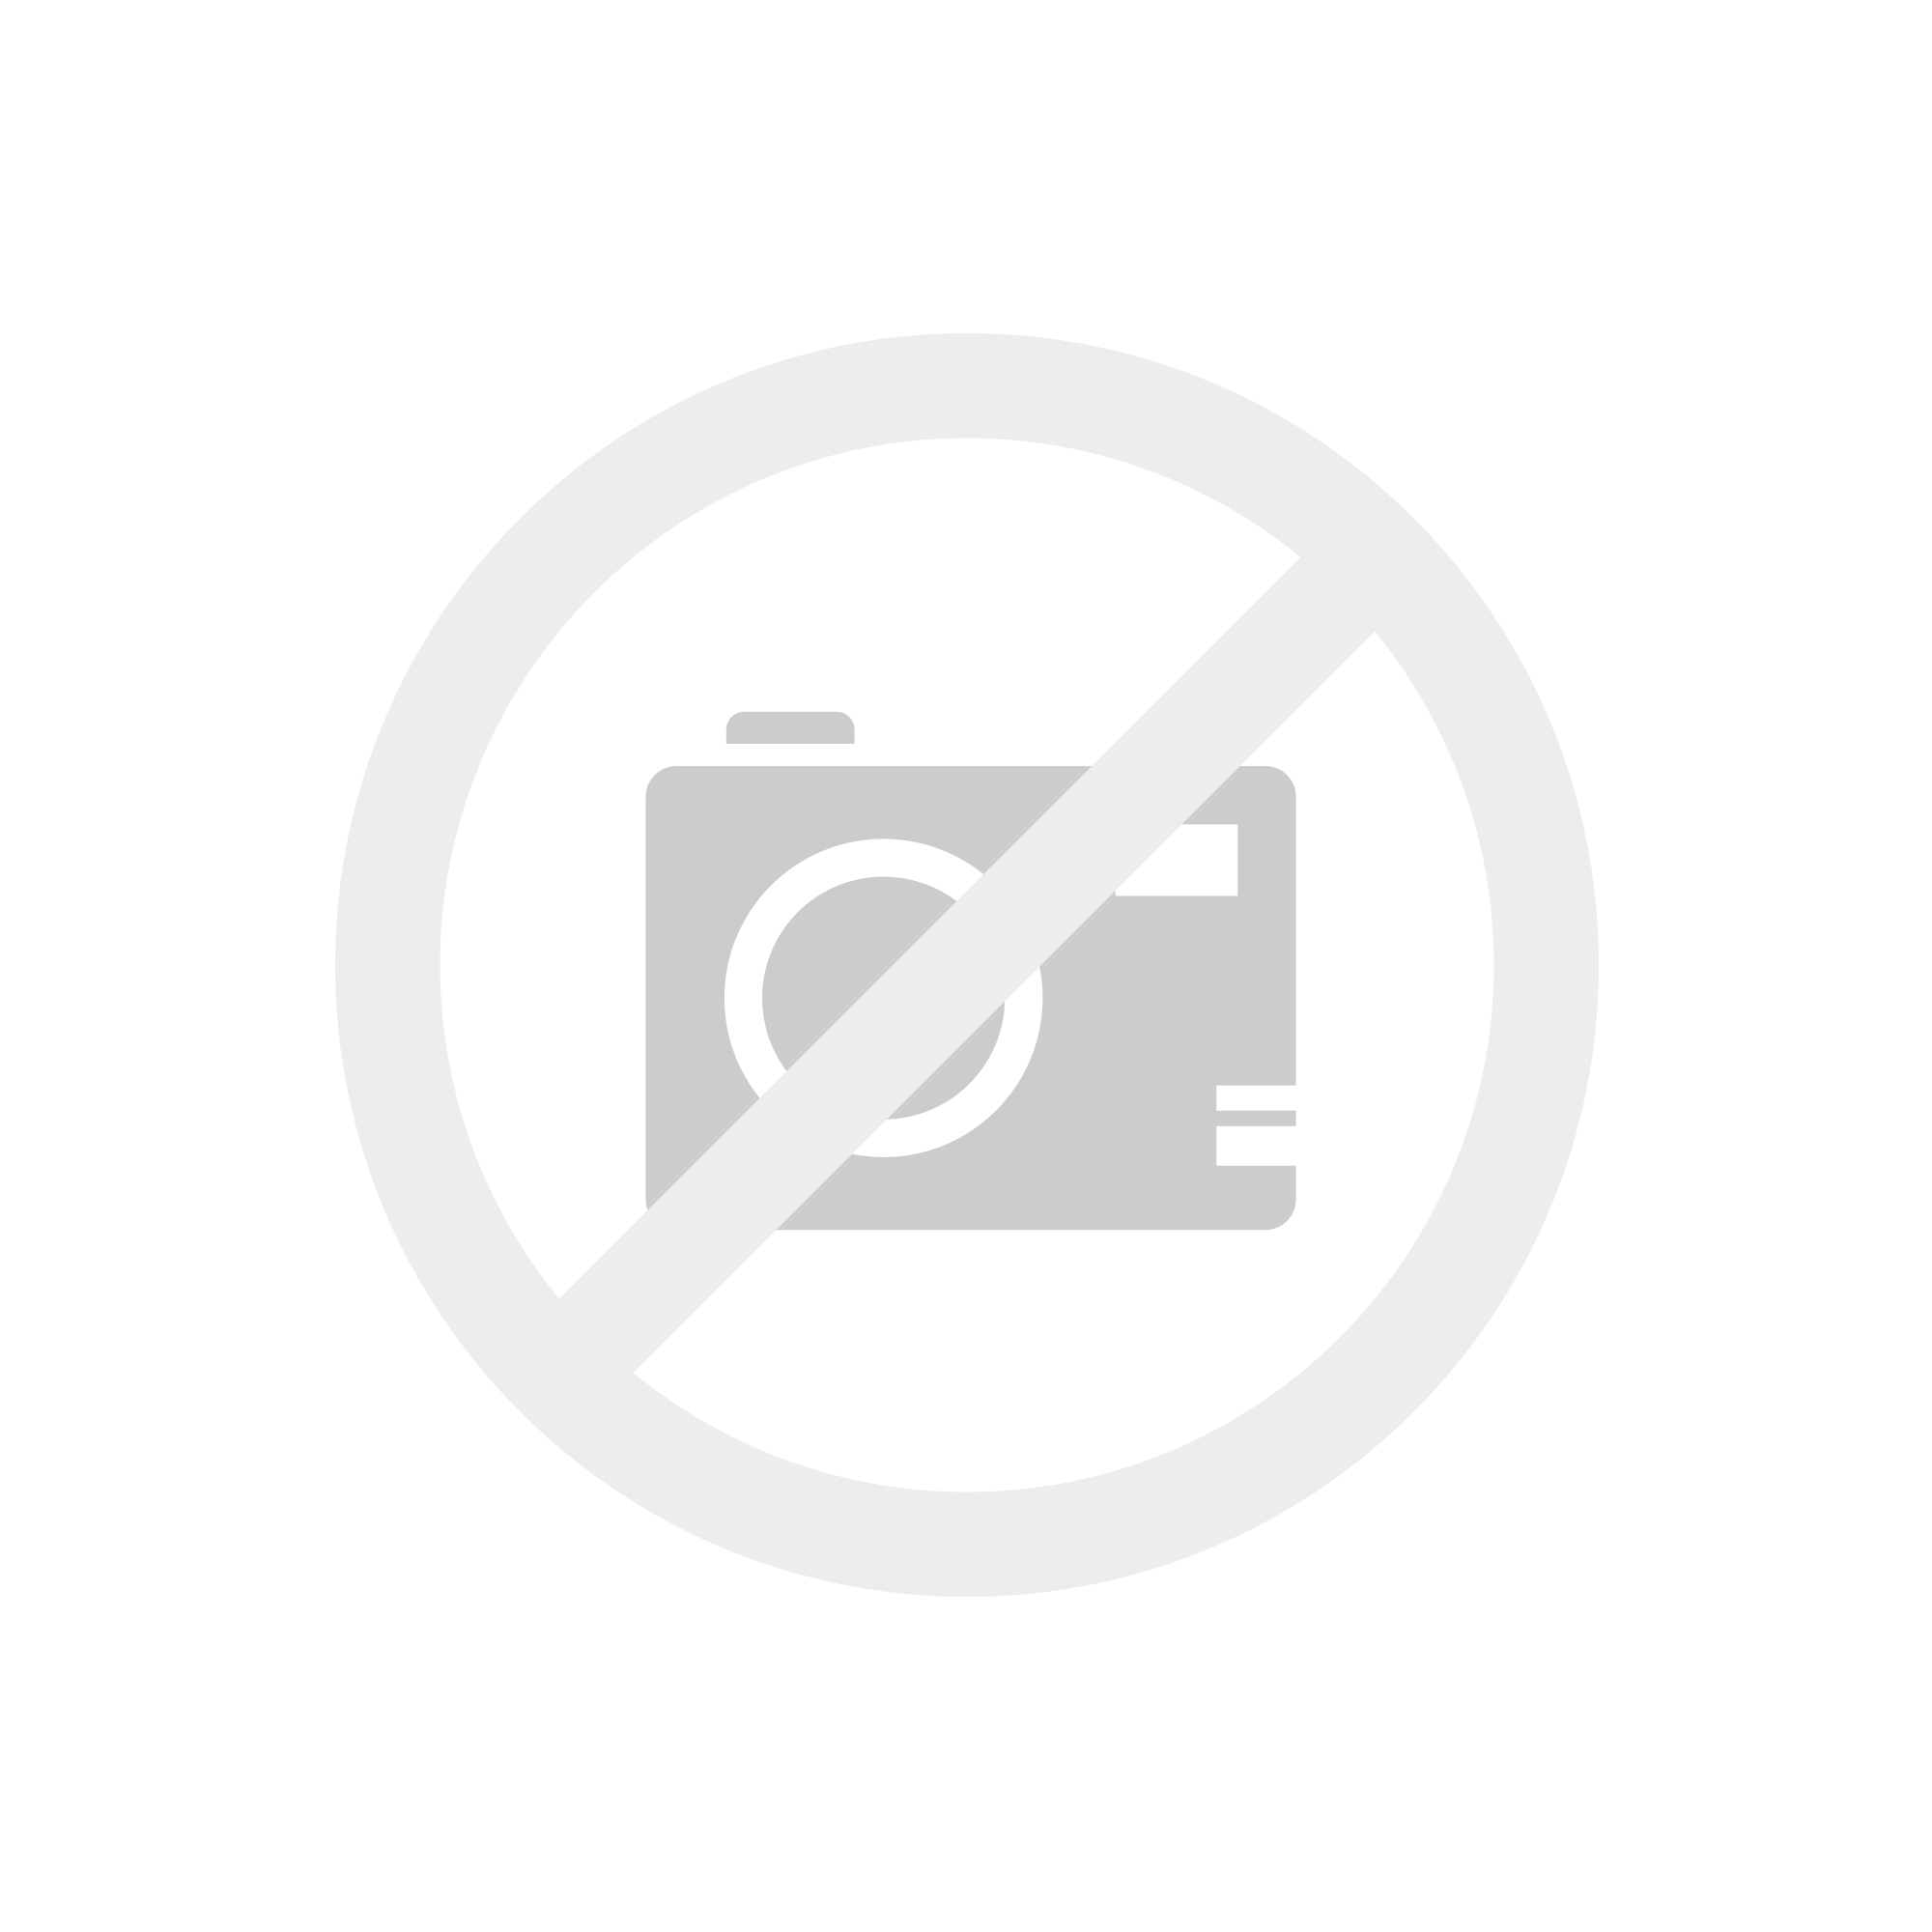 no product image available